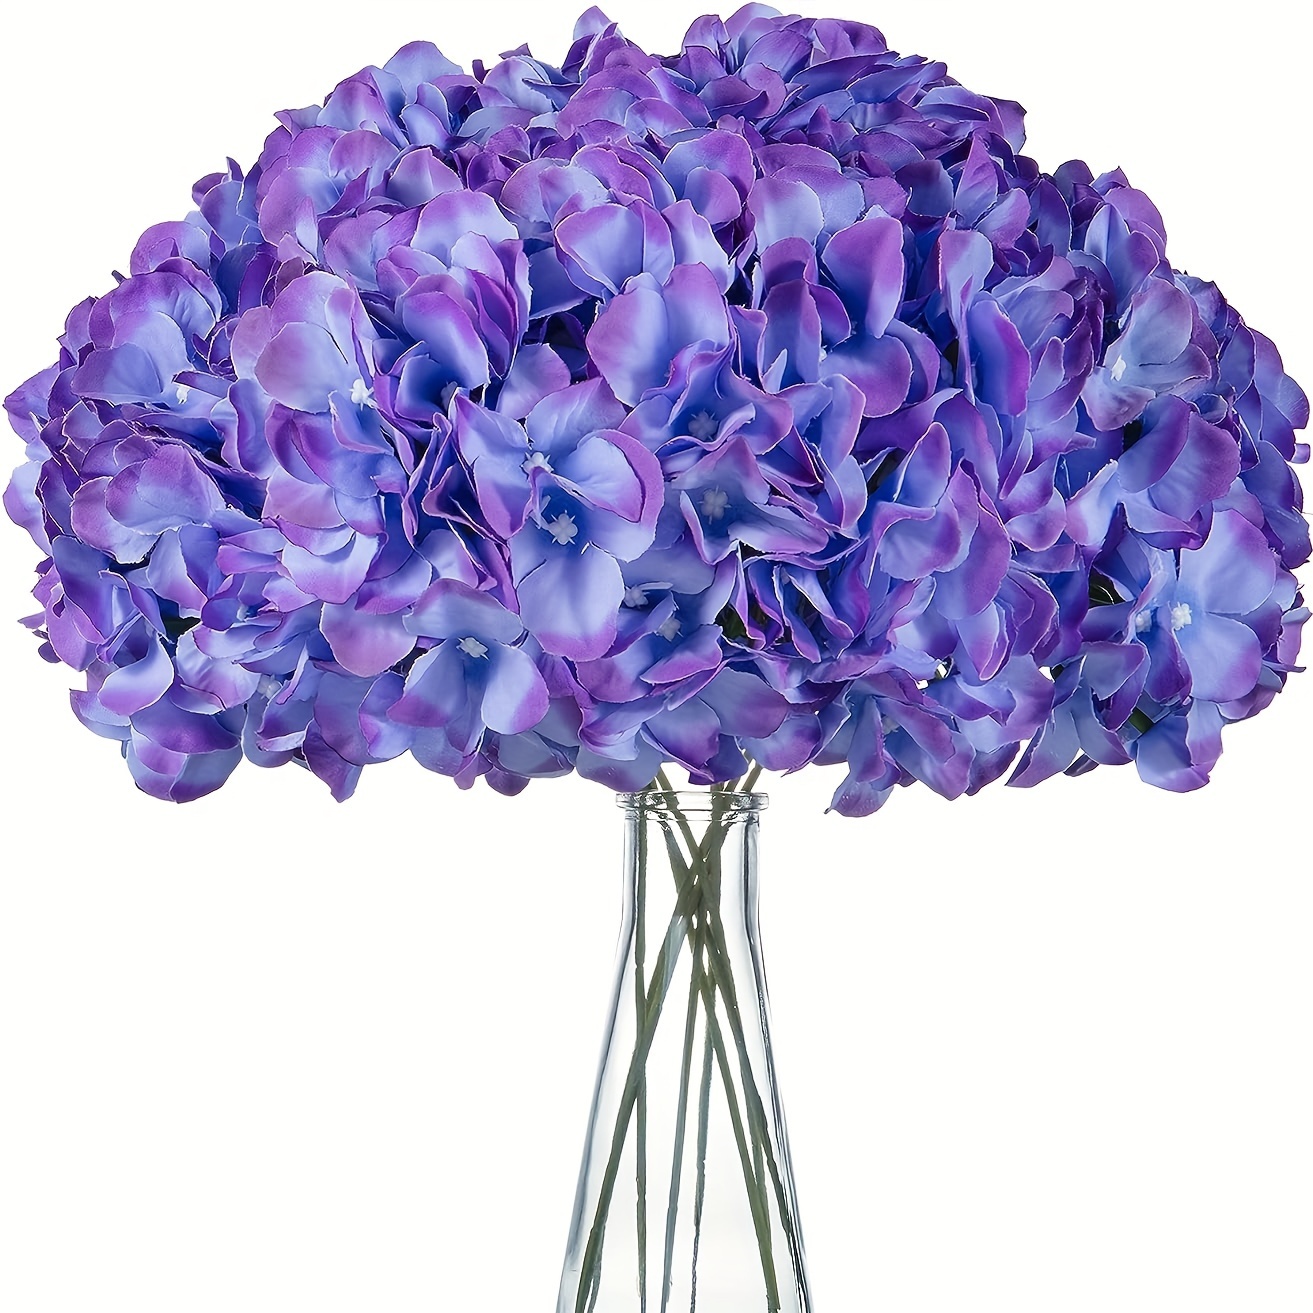 

5pack Artificial Hydrangea Flowers, Vintage Fake Hydrangeas Flowers Head With Stem, For Home Table Centerpieces Wedding Party Decor, Aesthetic Room Decor, Home Decor